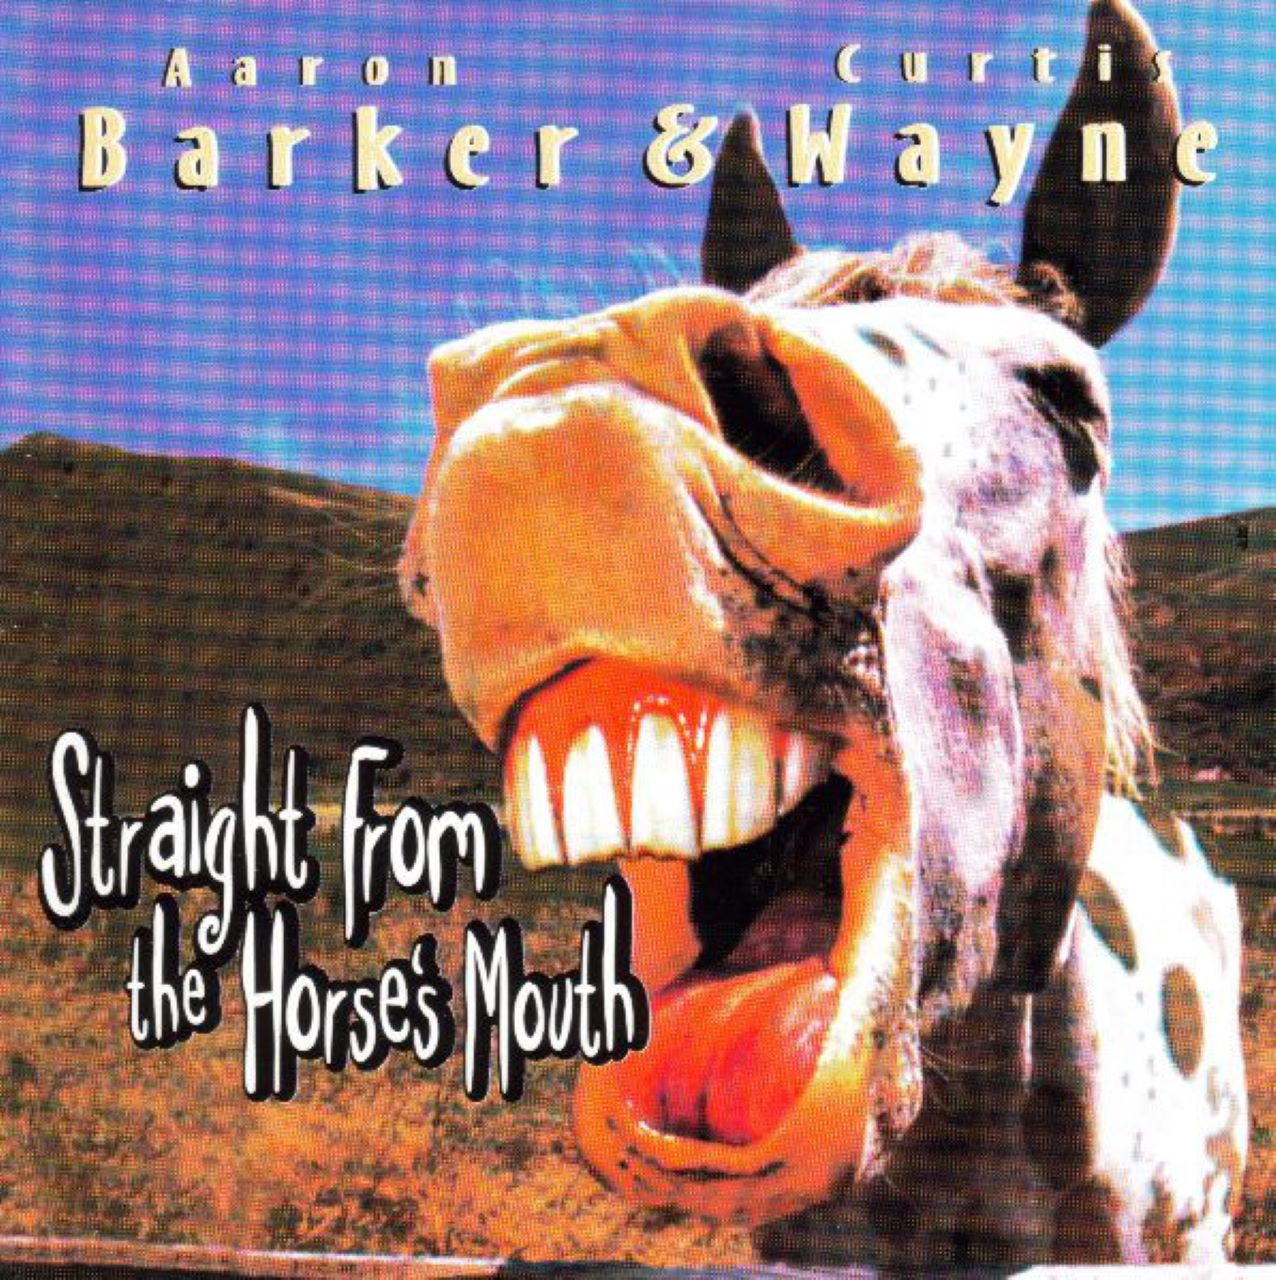 Aaron Barker & Curtis Wayne - Strait From The Horse's Mouth cover album